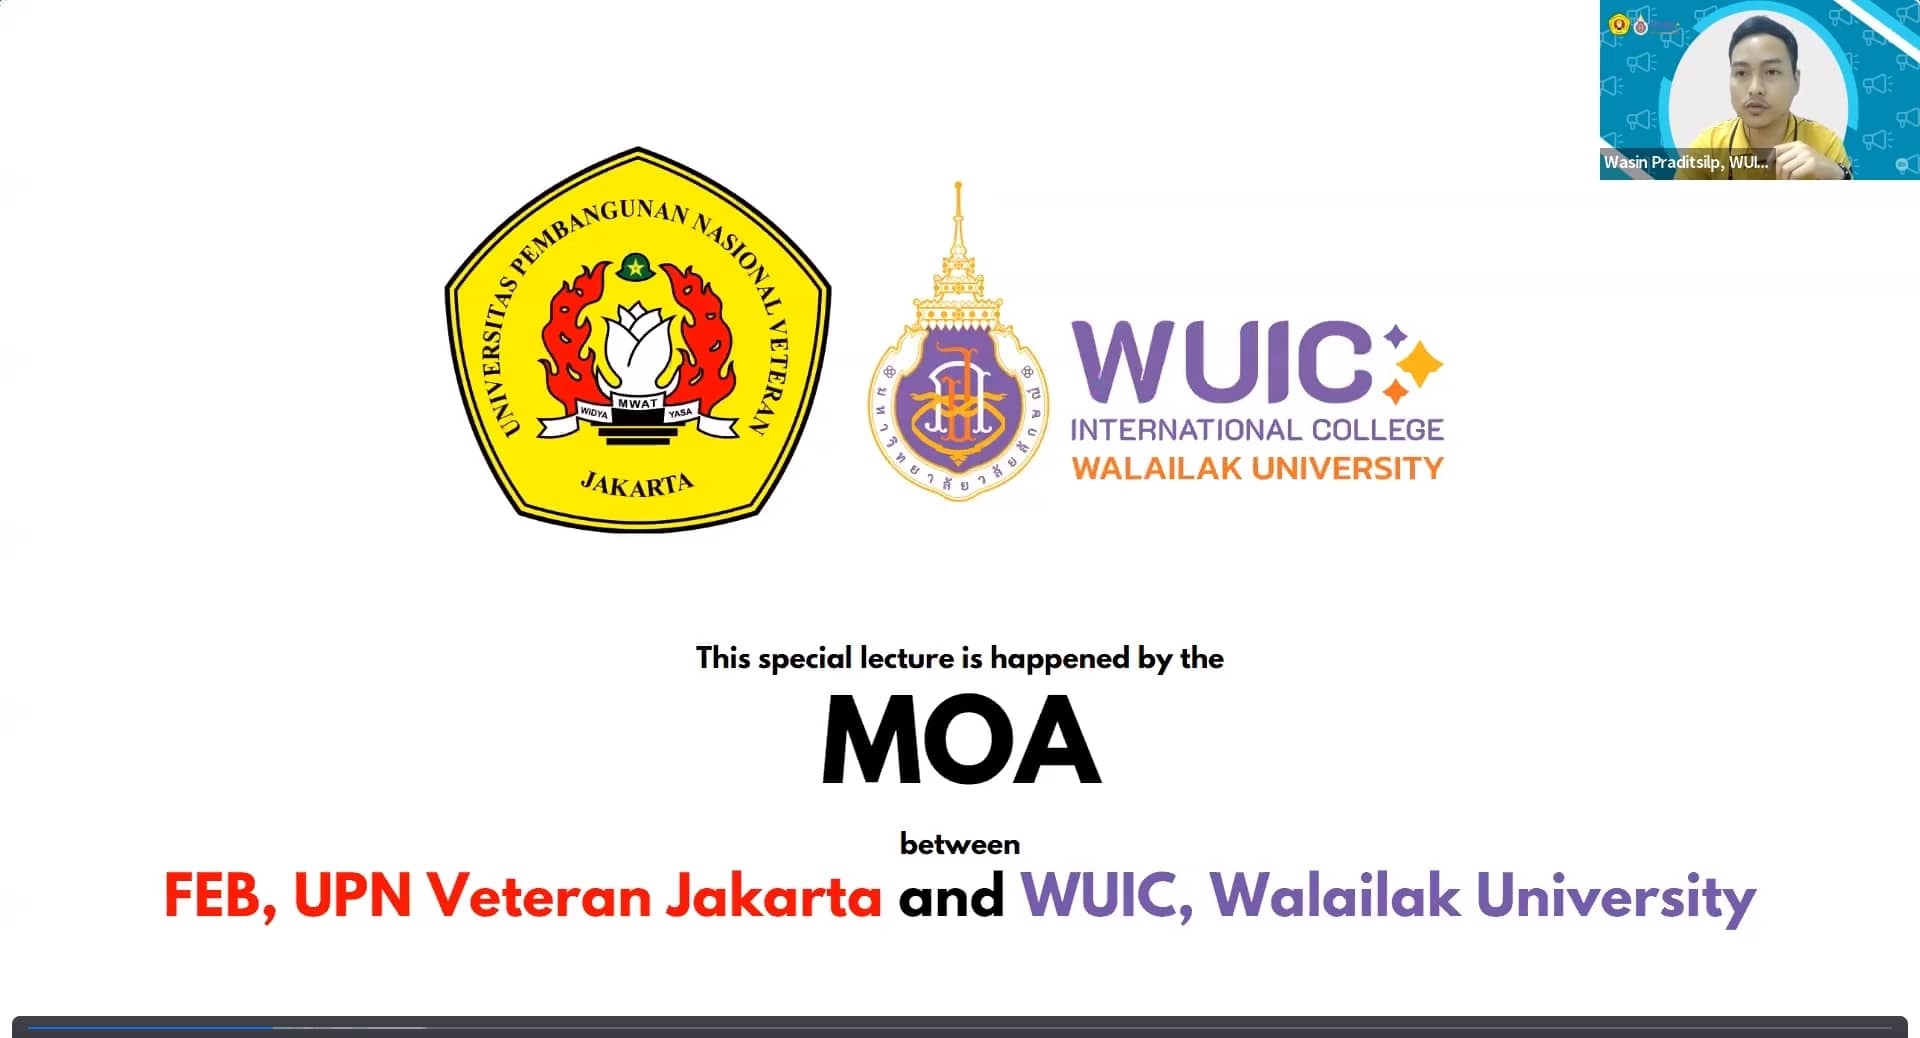 WUIC Lecturer Shares E-Marketing Insights with Indonesian Universities